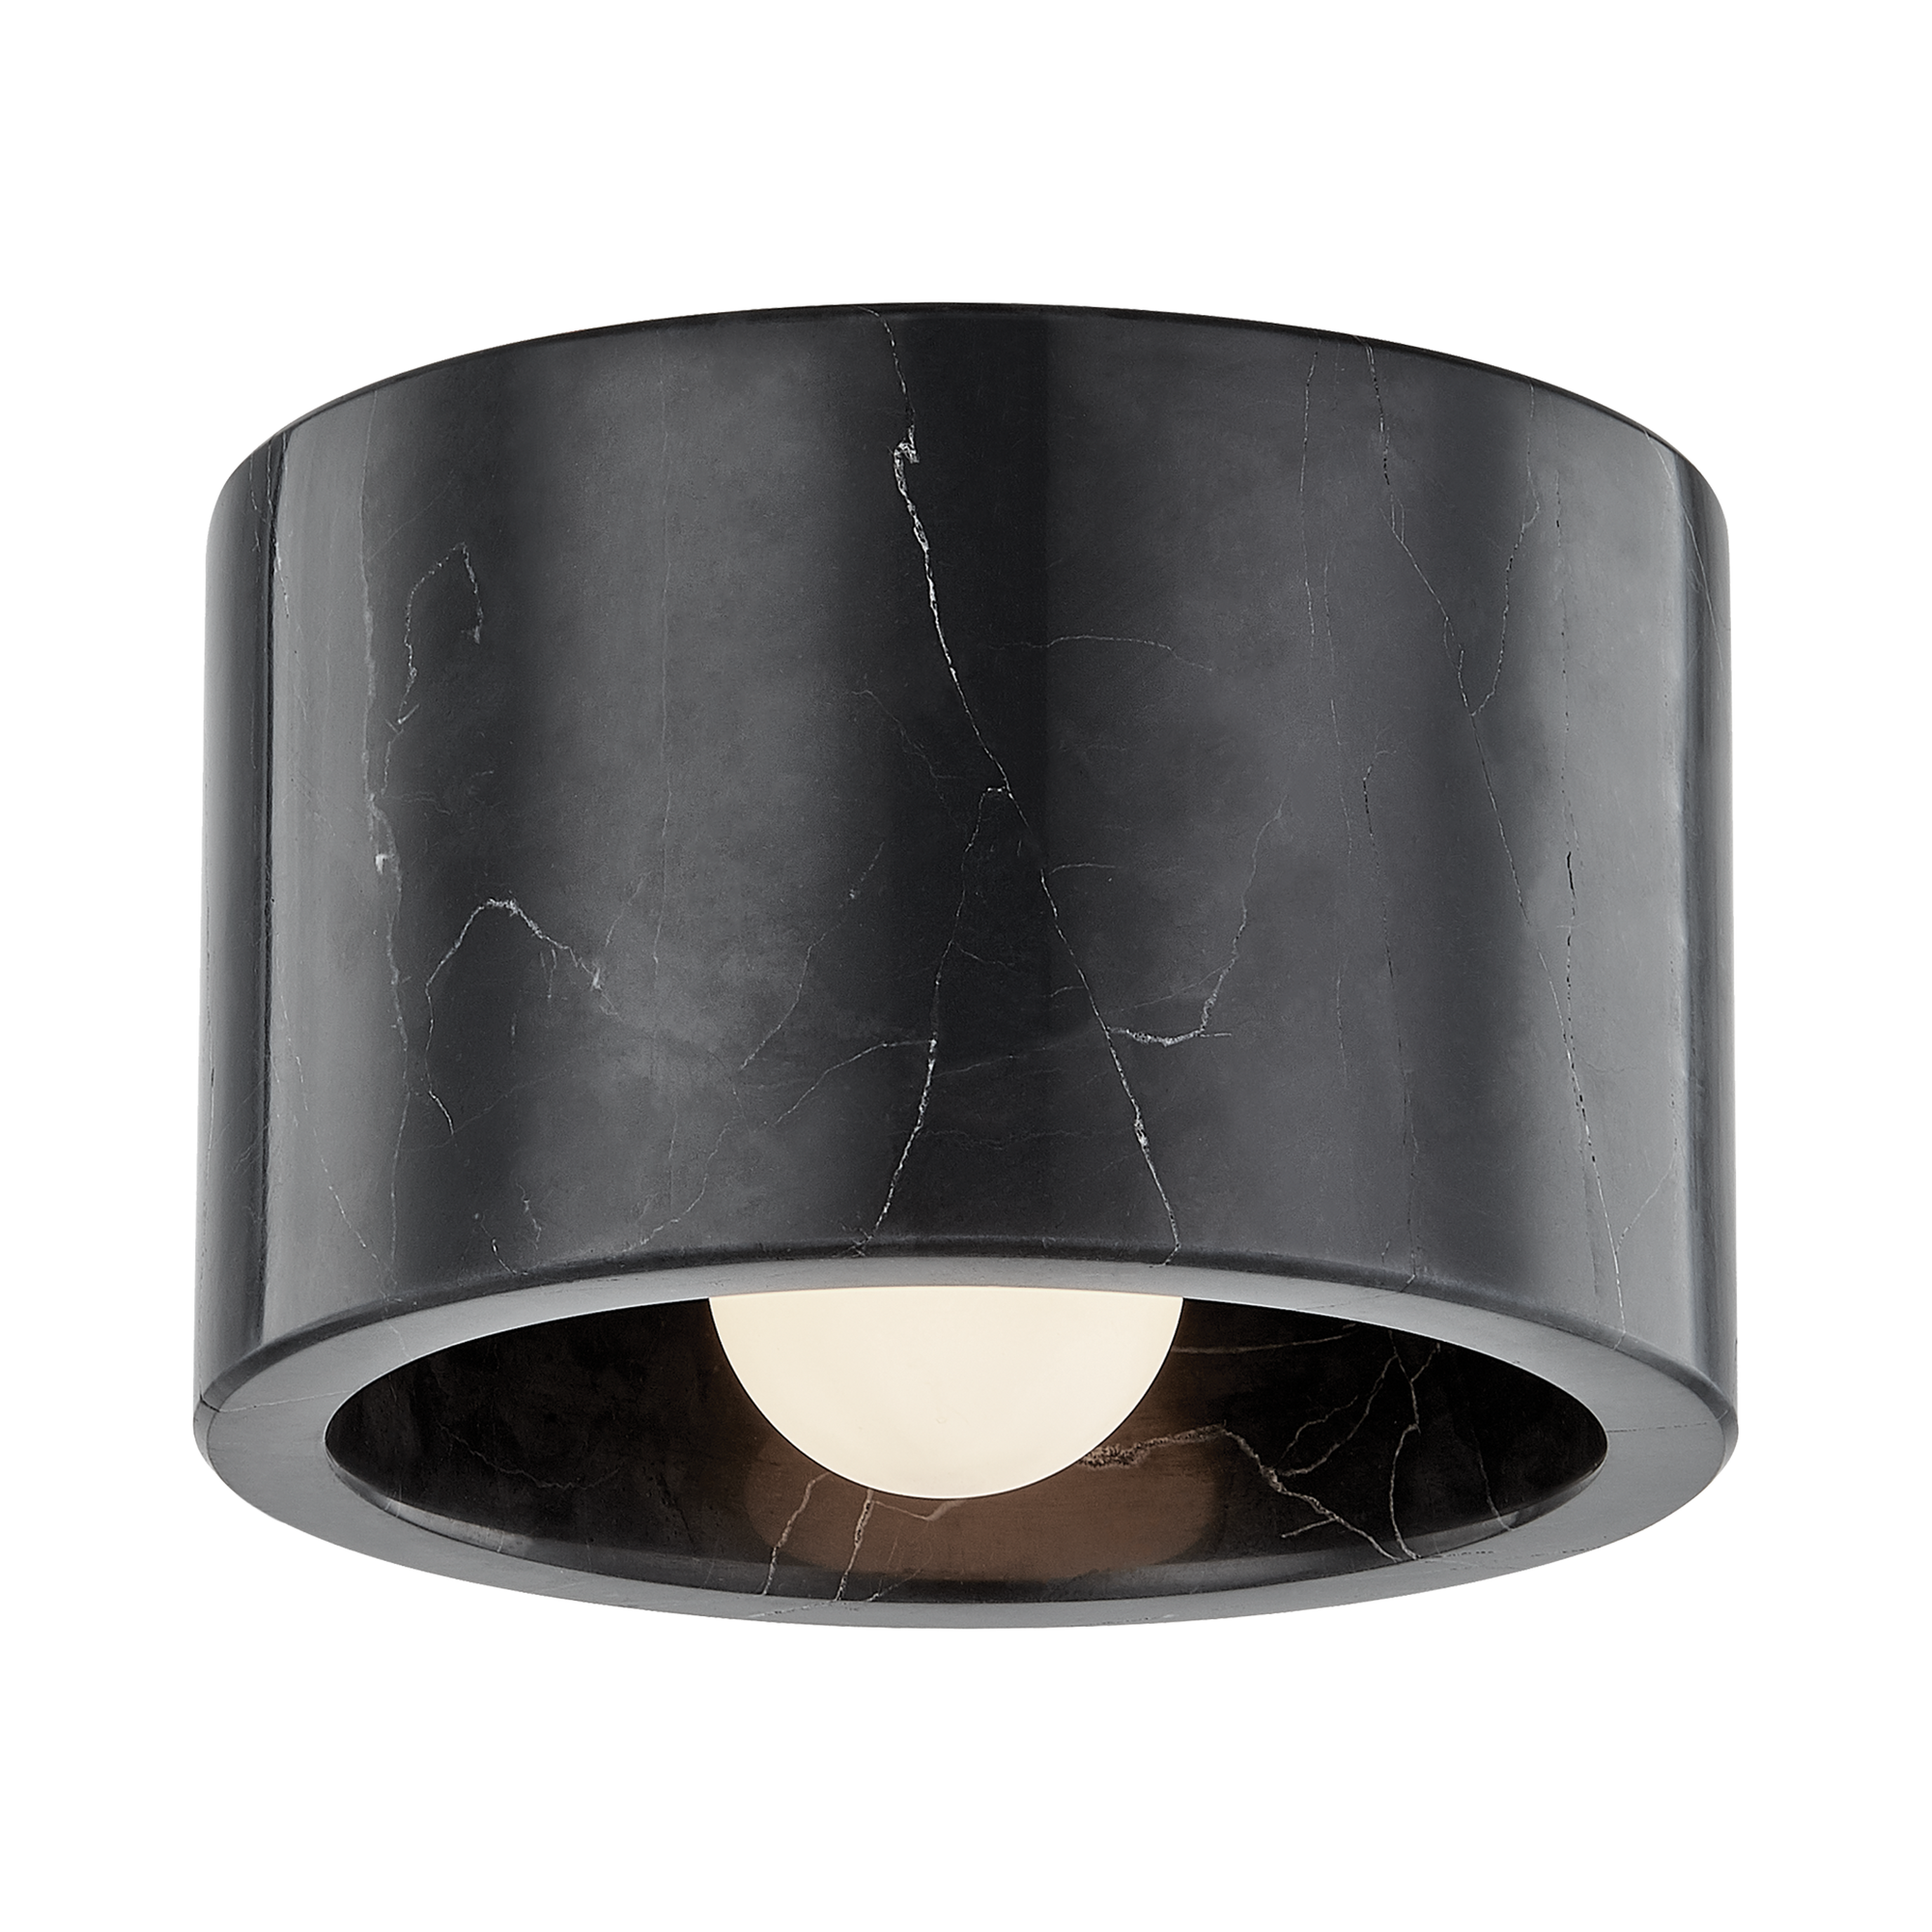 The Loris Flush Mount features a dramatic black marble finish.